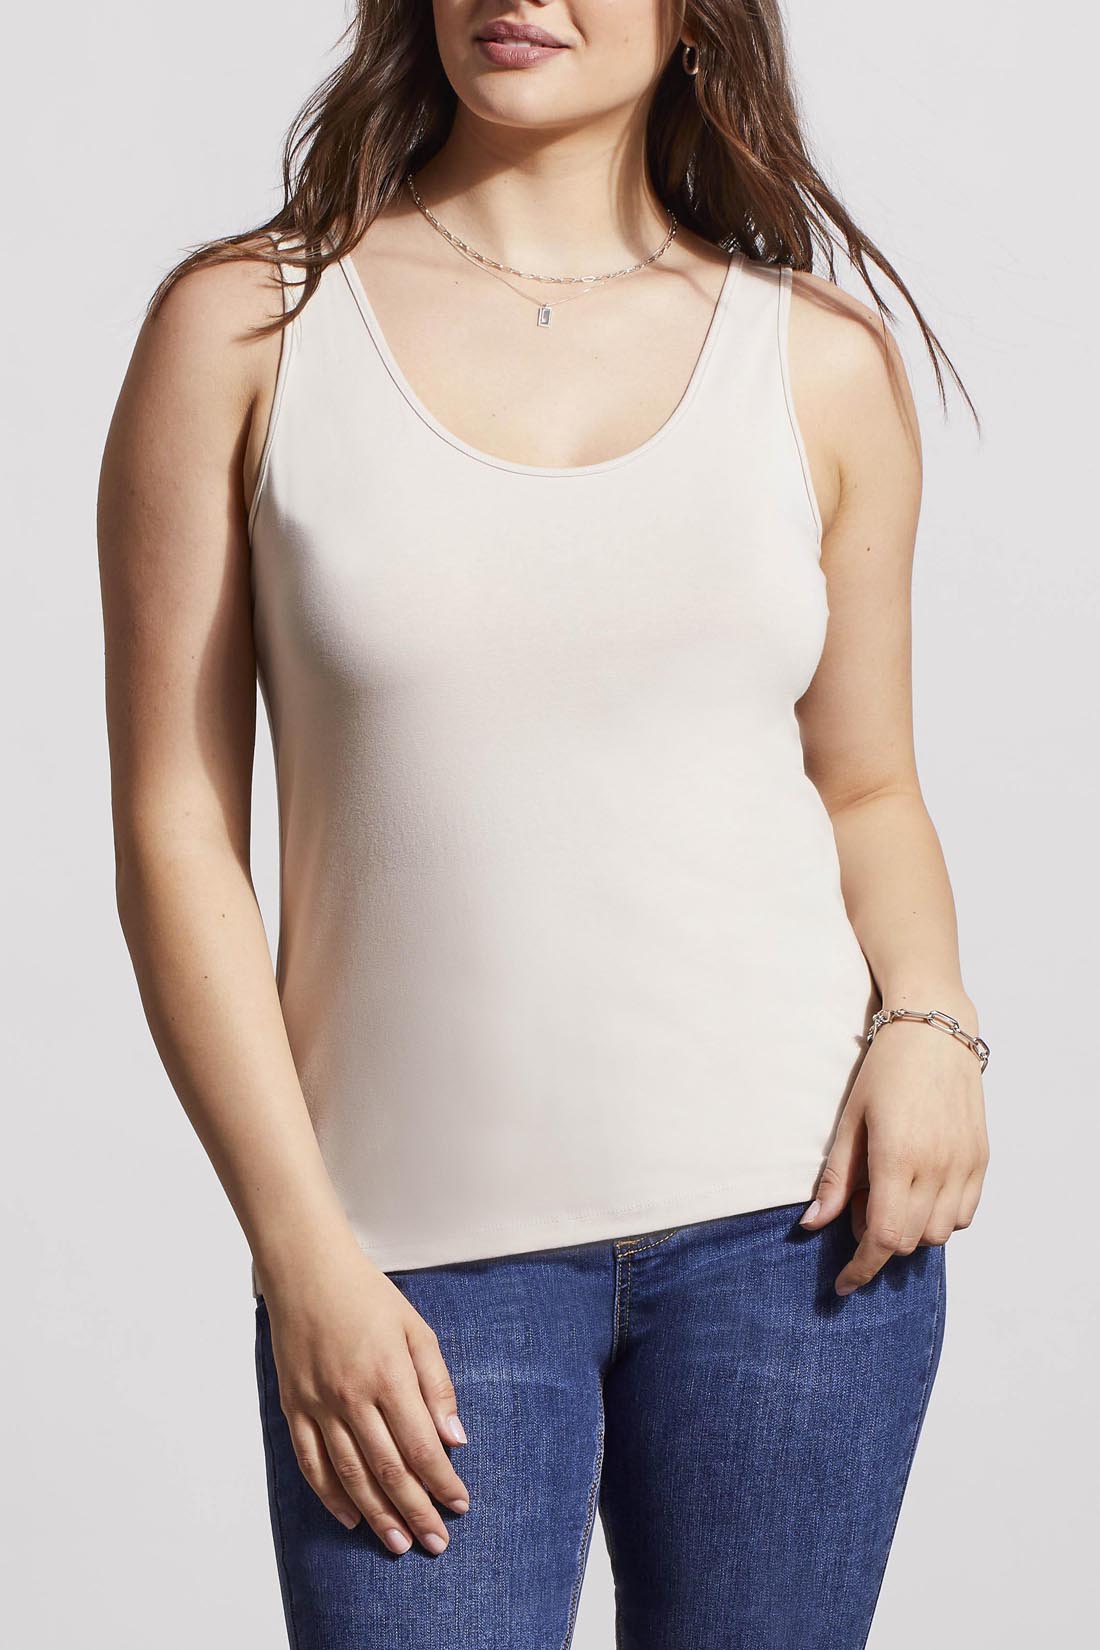 A woman in a cream Tribal Two Way Camisole and blue jeans, standing with one hand partially in her pocket.